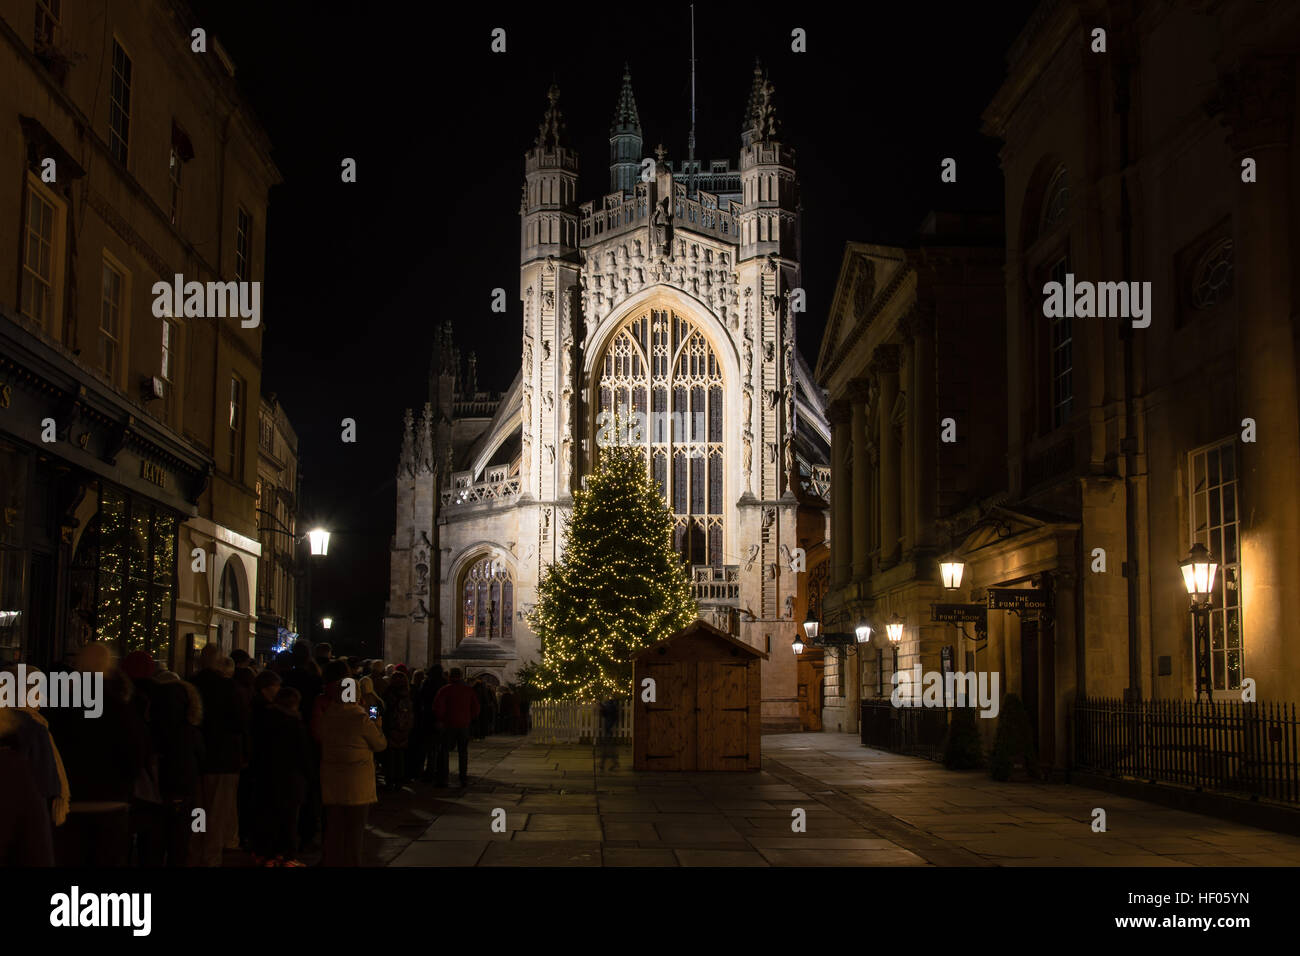 People queue for Christmas Midnight Mass at Bath Abbey. Hundreds line up ahead of religious service to celebrate Christmas mass Stock Photo